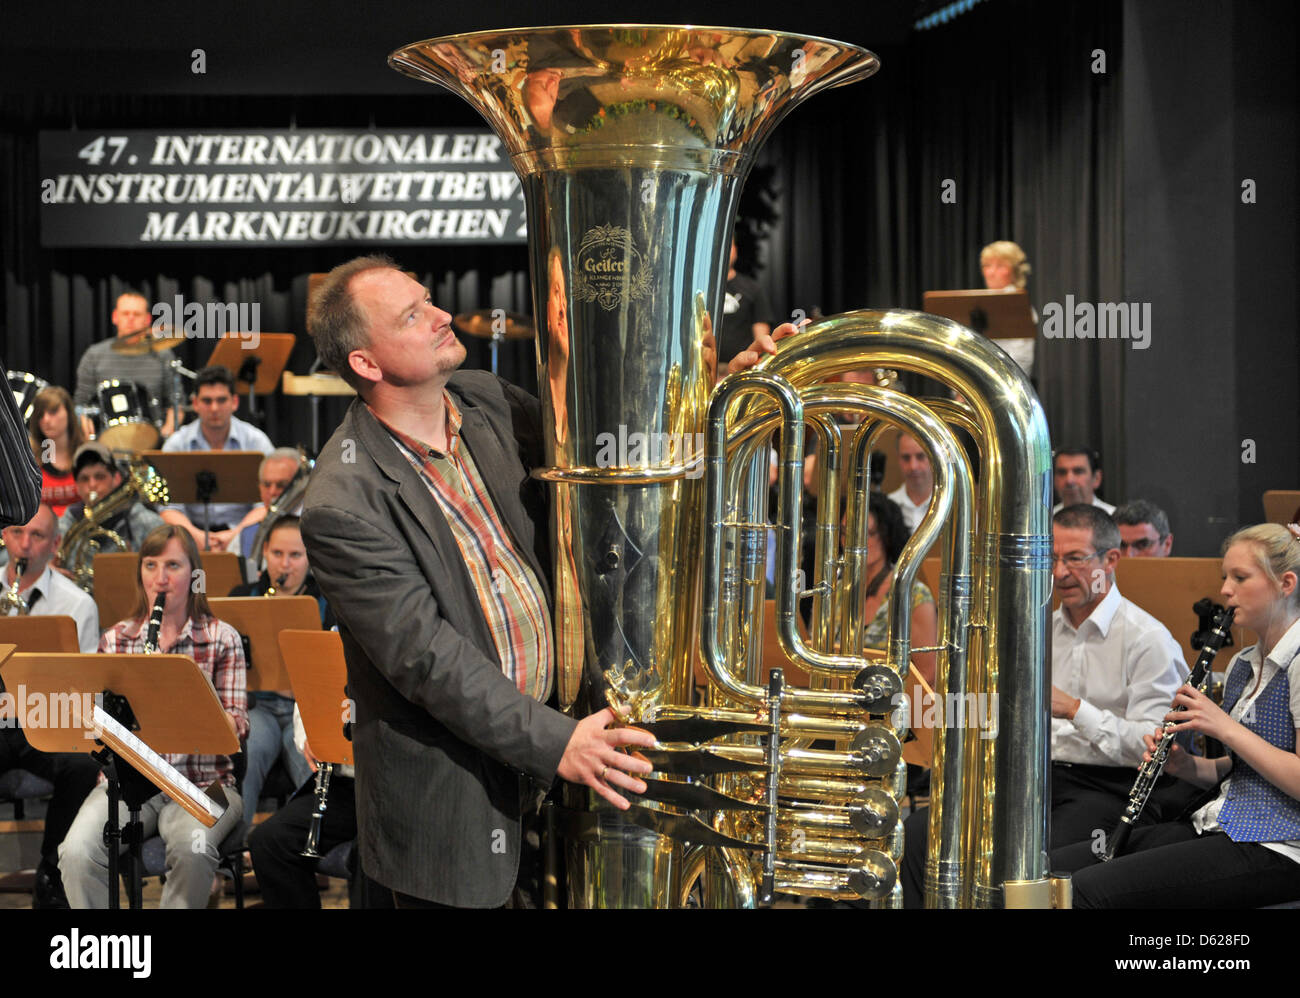 Joerg Wachsmuth from Dresden plays 'Flight of the Bumblebee' on the world's biggest playable tuba with the symphony orchestra of Markneukirchen inMarkneukirchen, Germany, 15 May 2012. The tuba is 2 meters high, weighs arounf 50 kg and has a bell with a 1 m diameter, making it roughly twice as big as an ordinary sized tuba. Photo: HENDRIK SCHMIDT Stock Photo